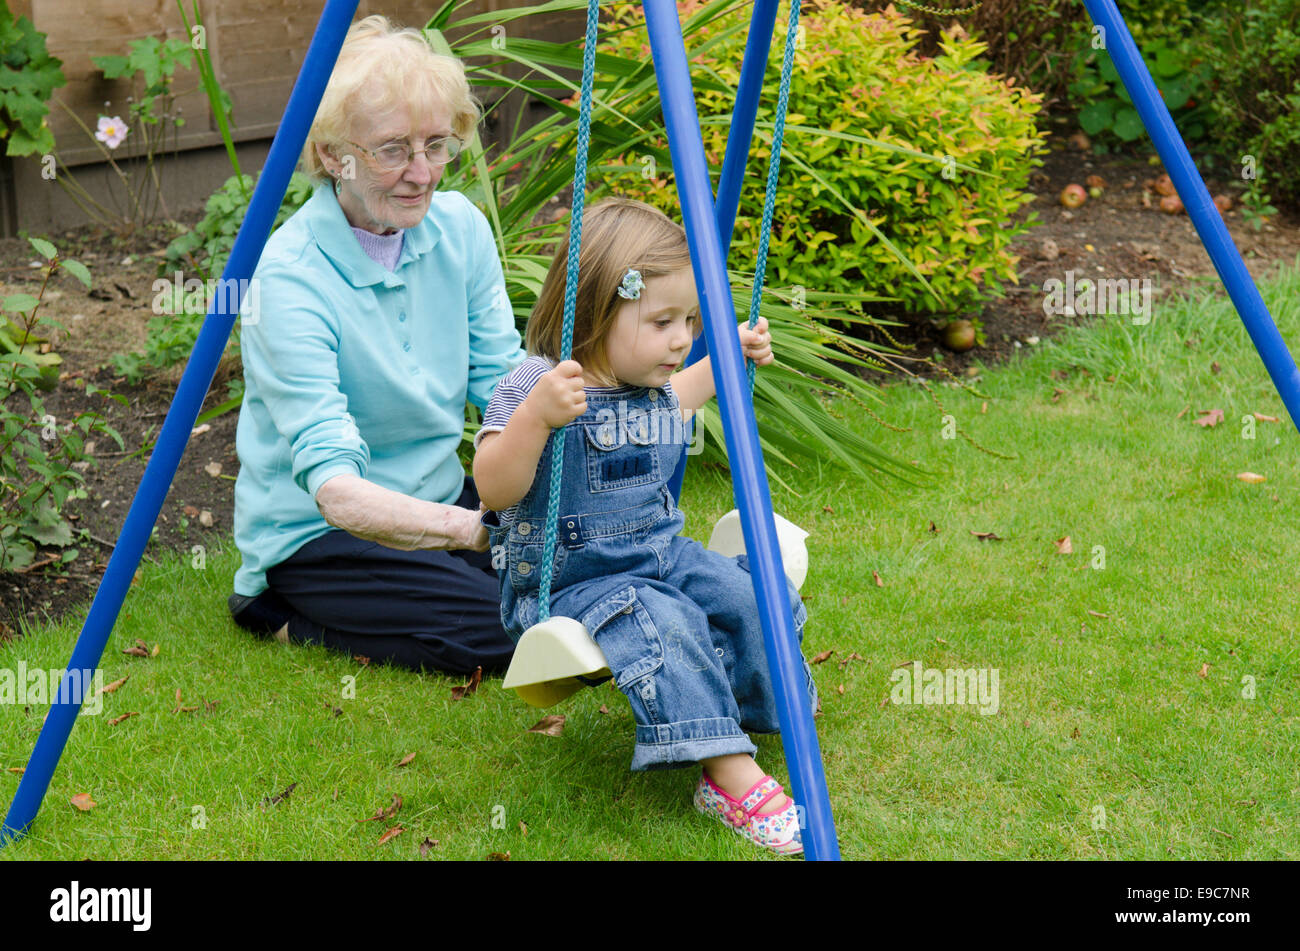 Great-grandmother playing with her great-granddaughter in a garden. UK Stock Photo